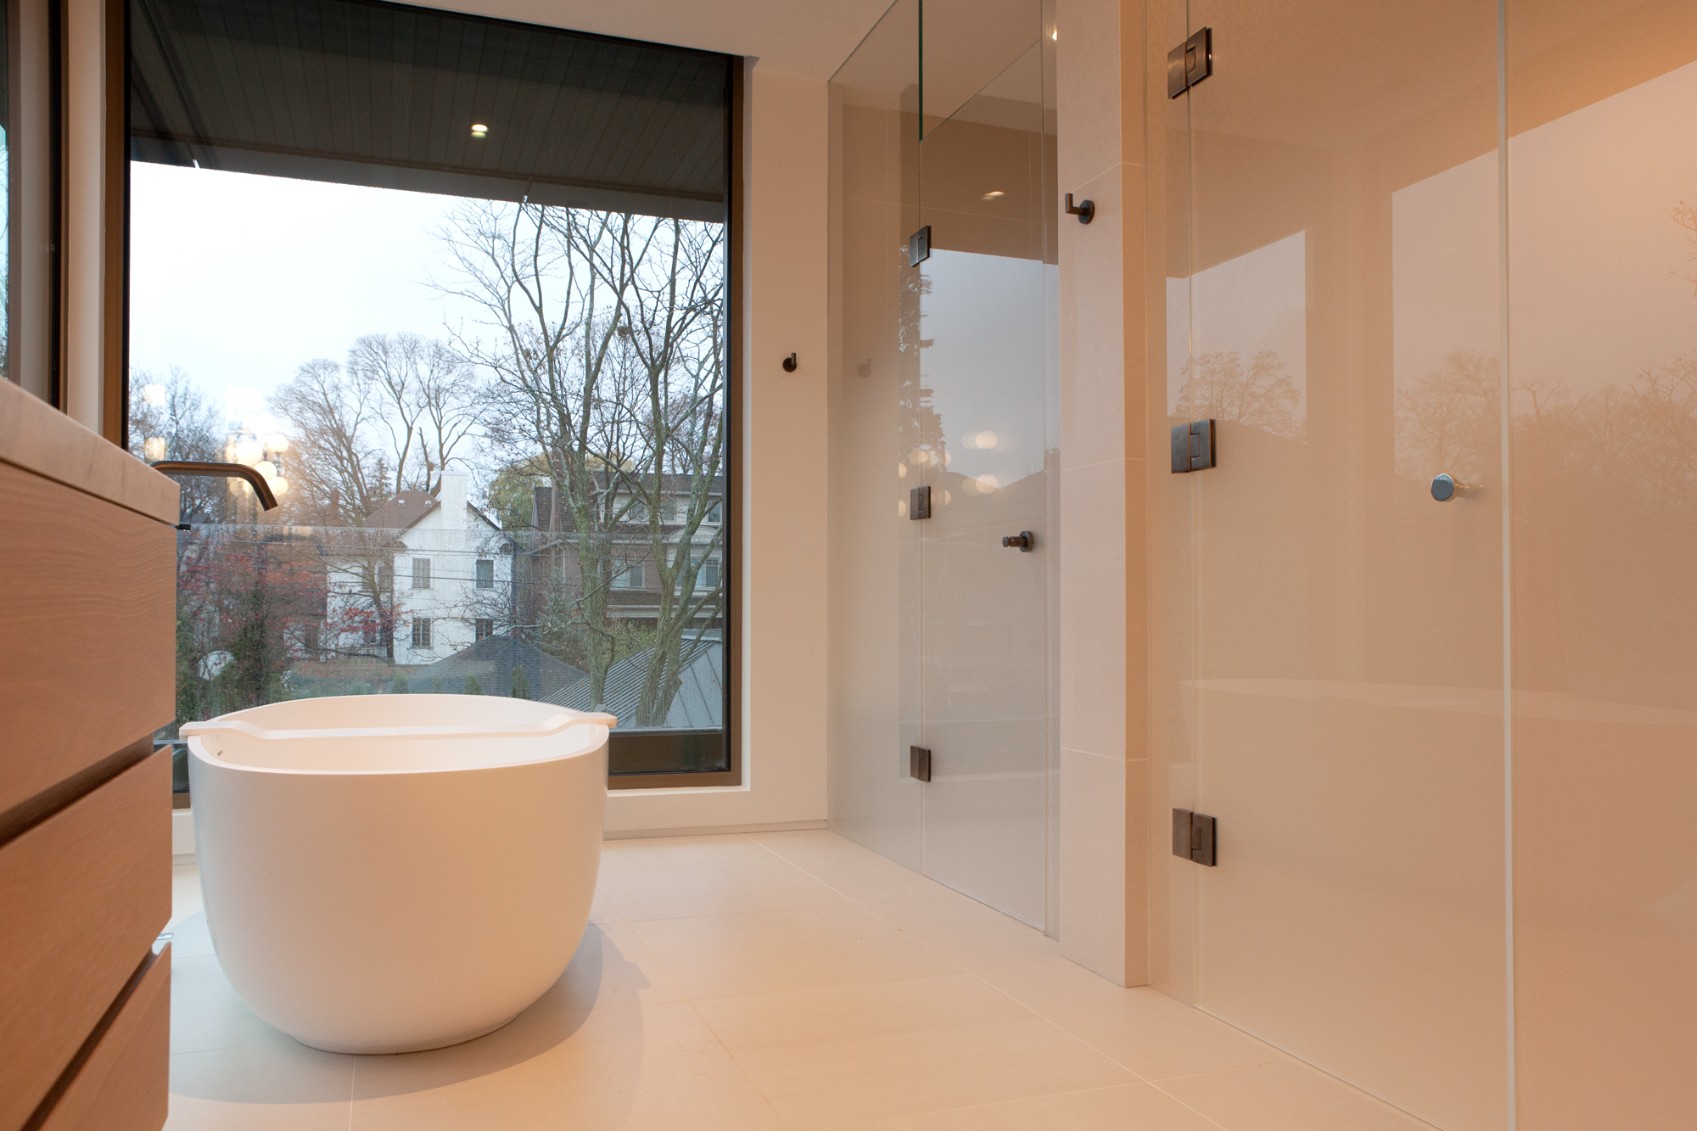 Luxury bathroom with white freestanding tub in front of frosted window by SevernWoods